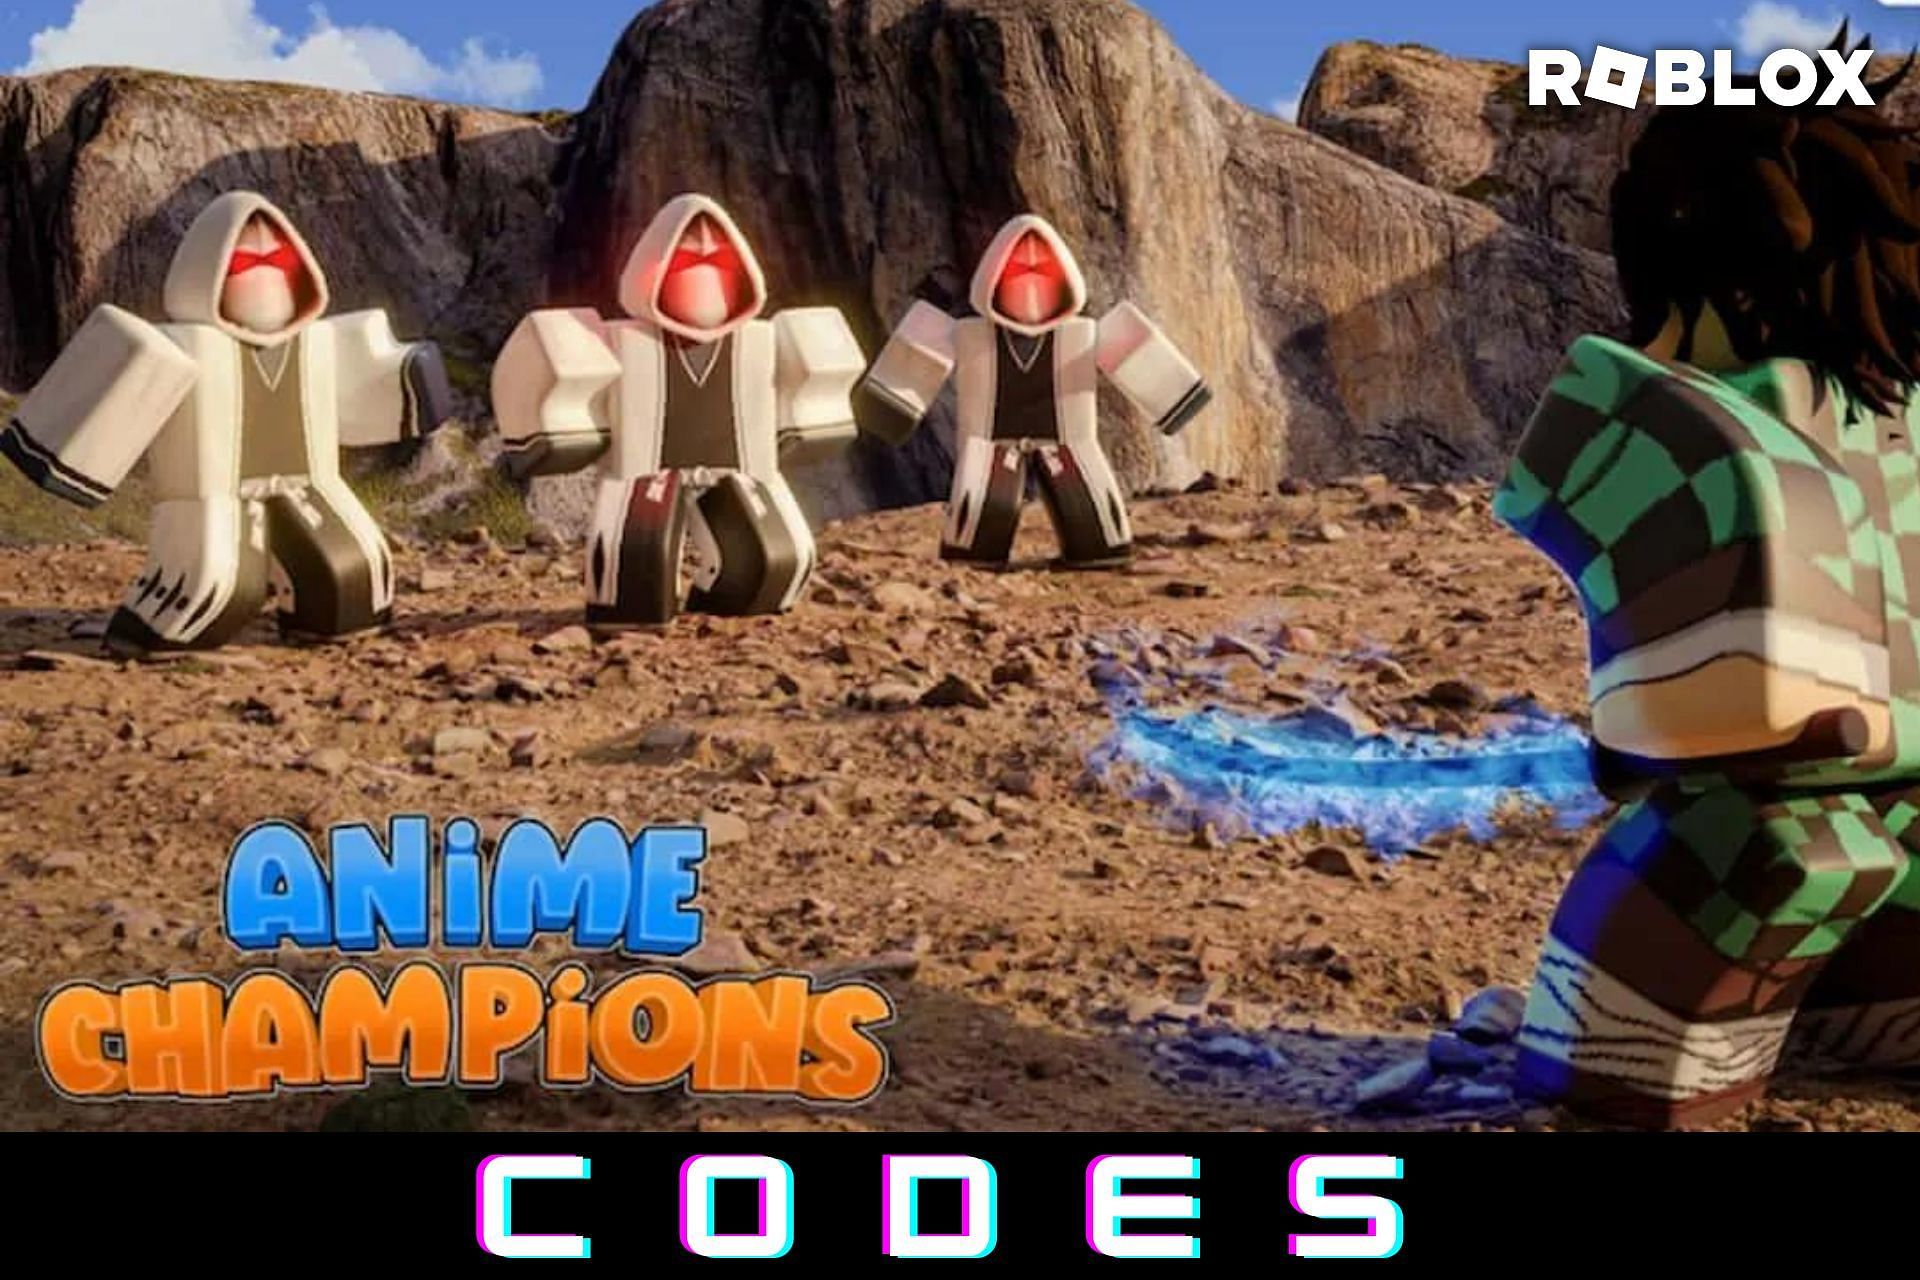 NEW* ALL WORKING UPDATE CODES FOR ANIME CHAMPIONS SIMULATOR